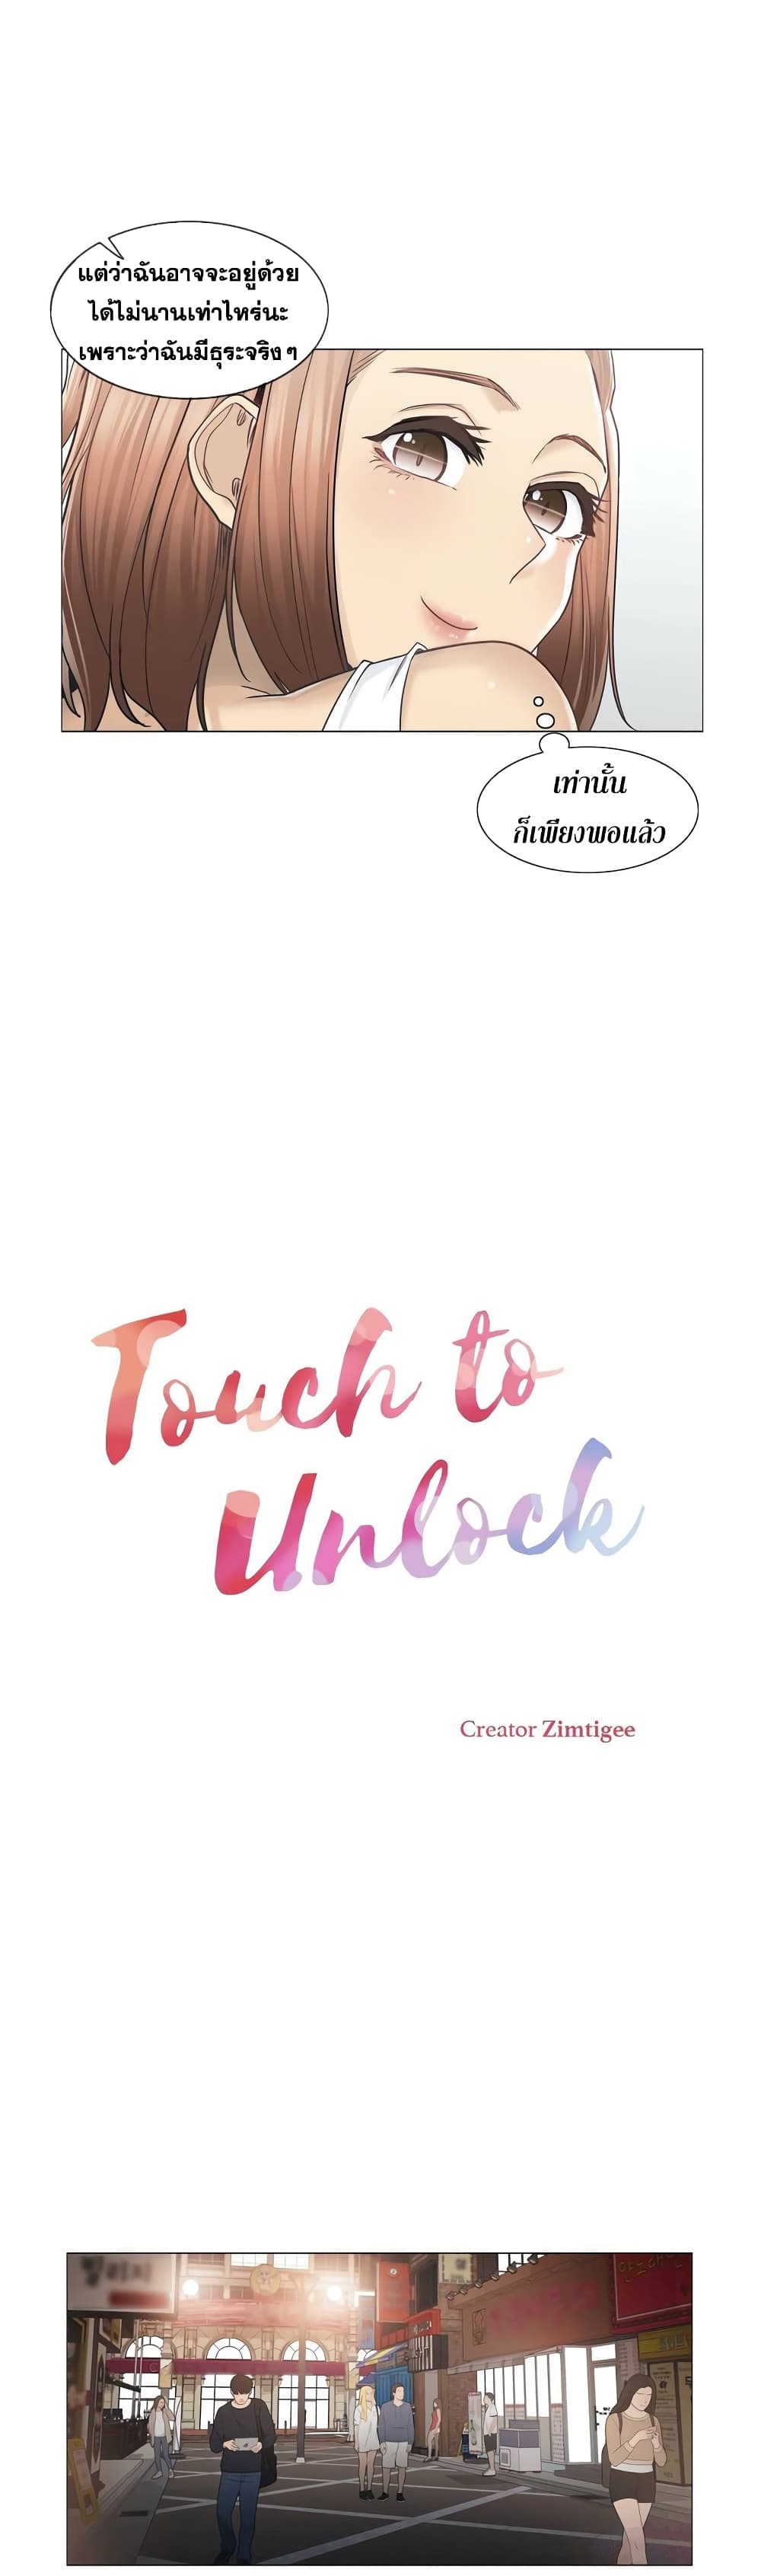 Touch To Unlock 43 (5)